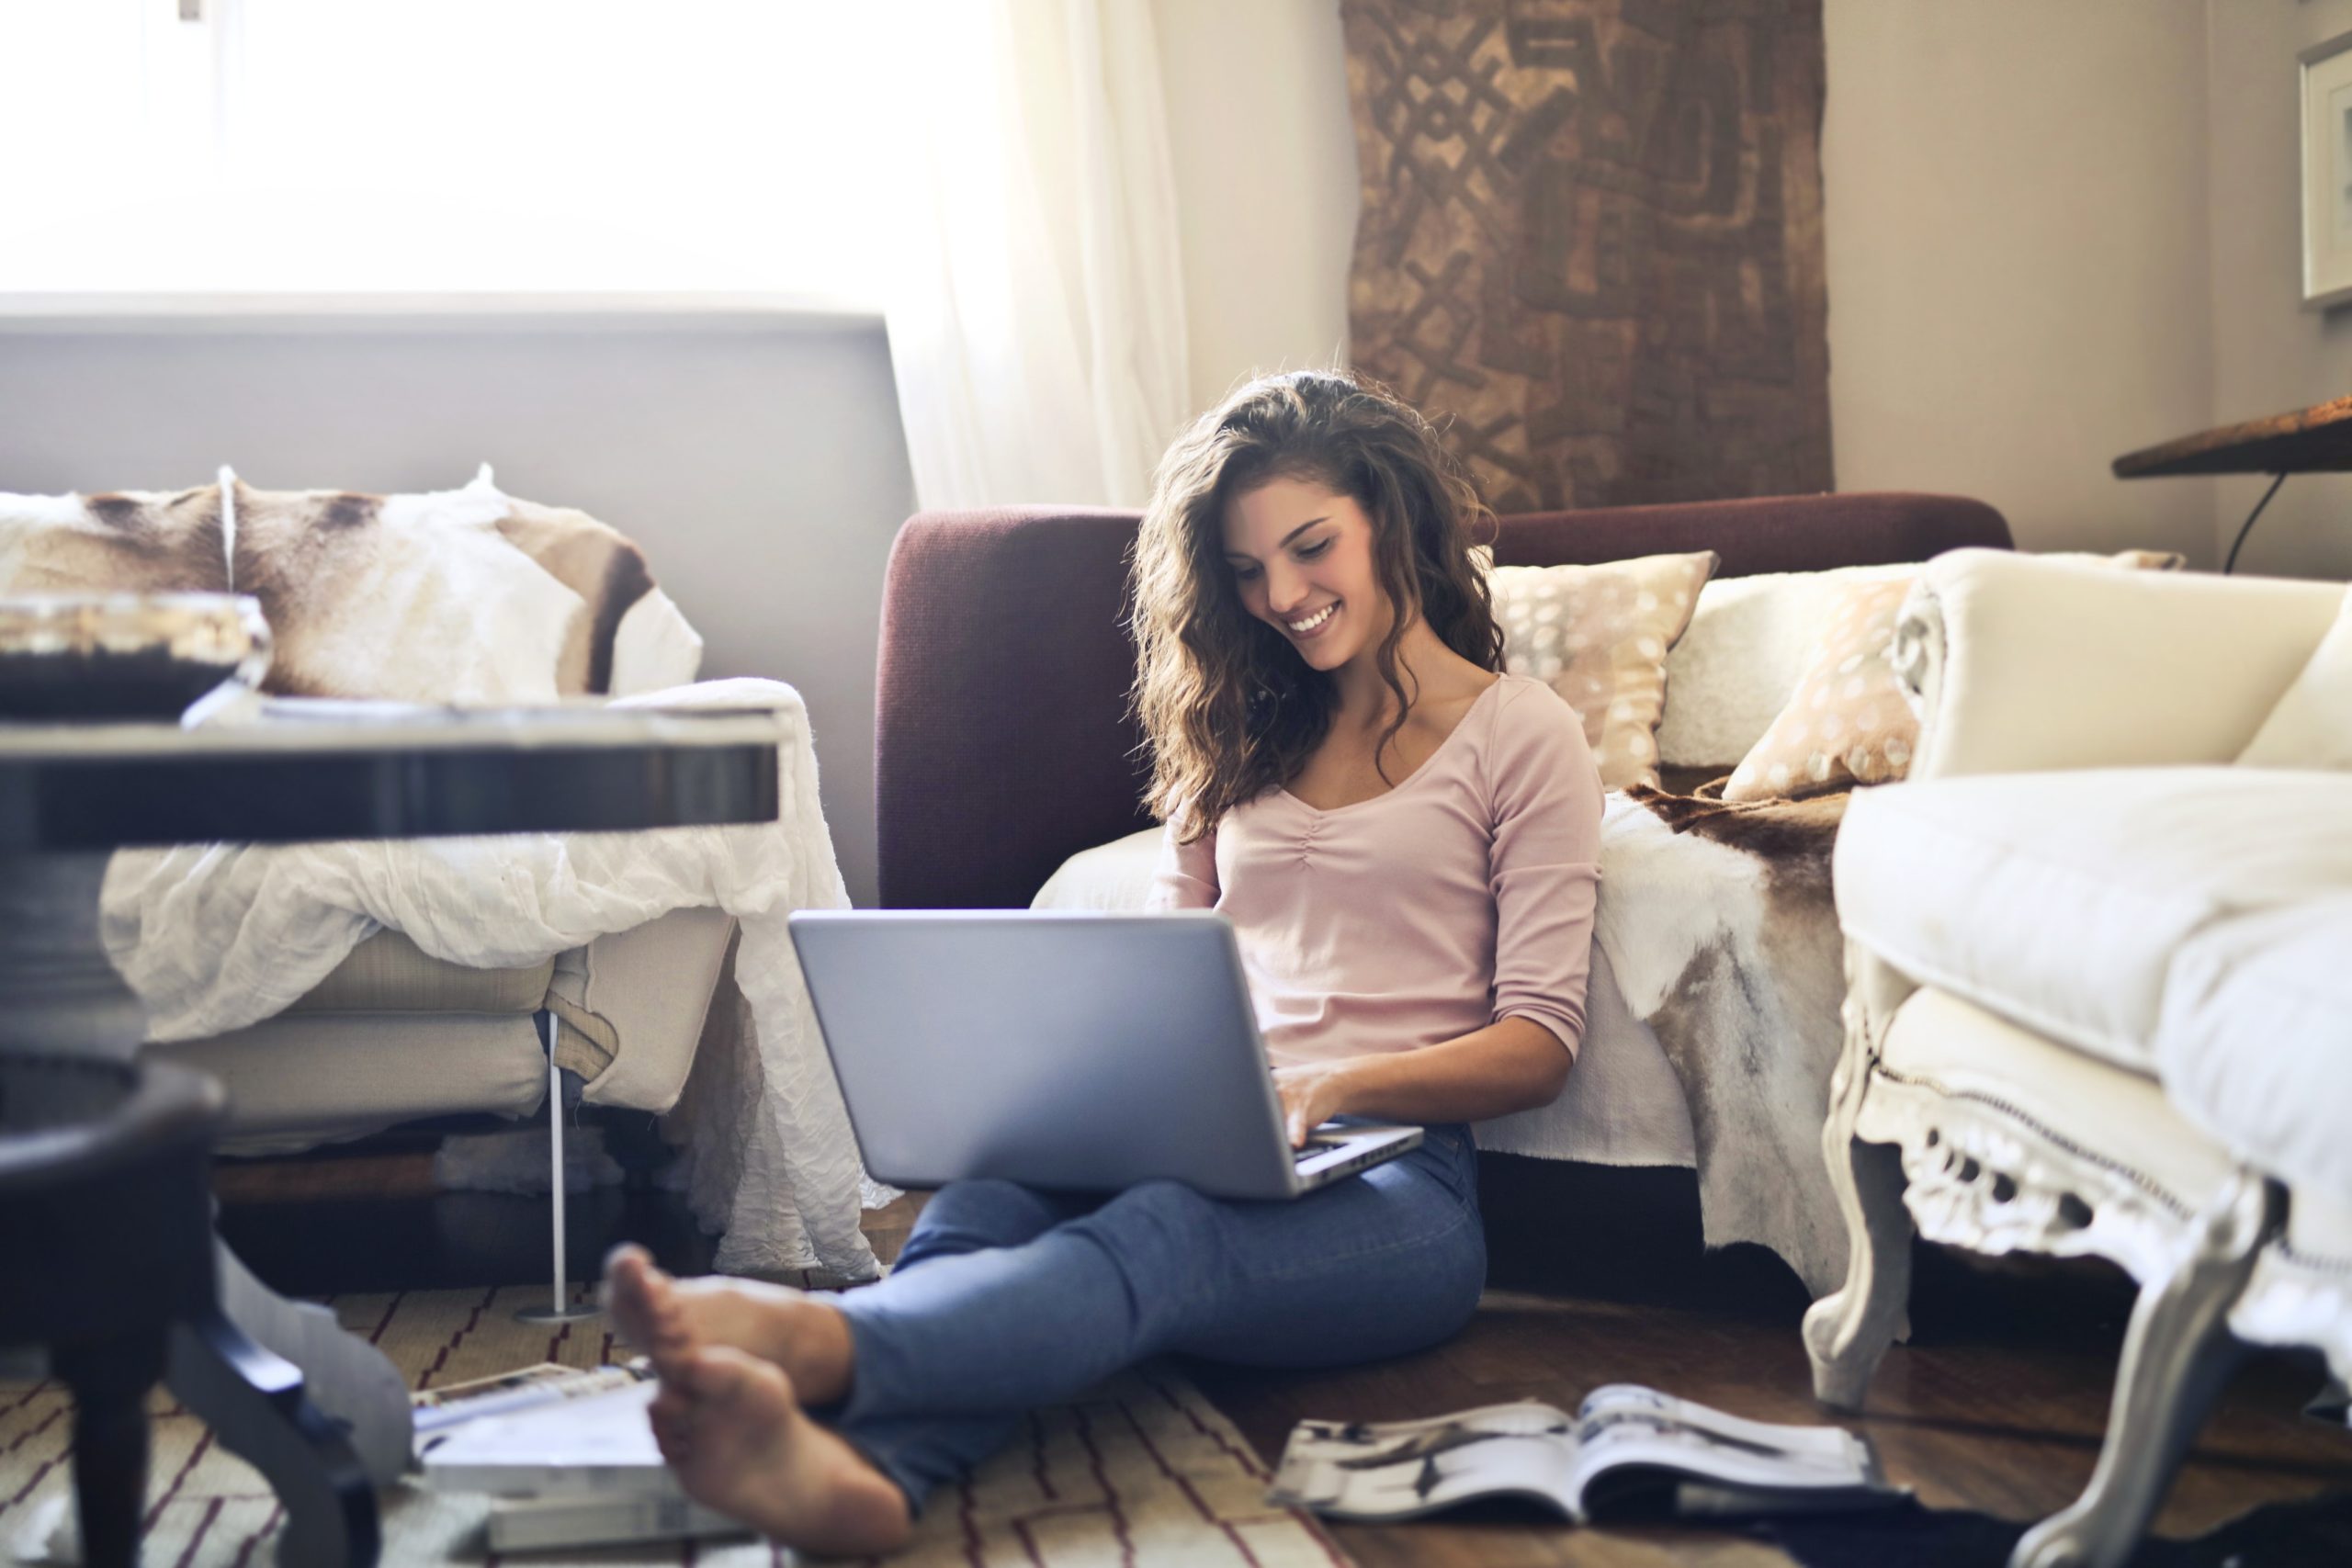 Working remotely? Here’s our tips to nail working from home during the COVID19 crisis.